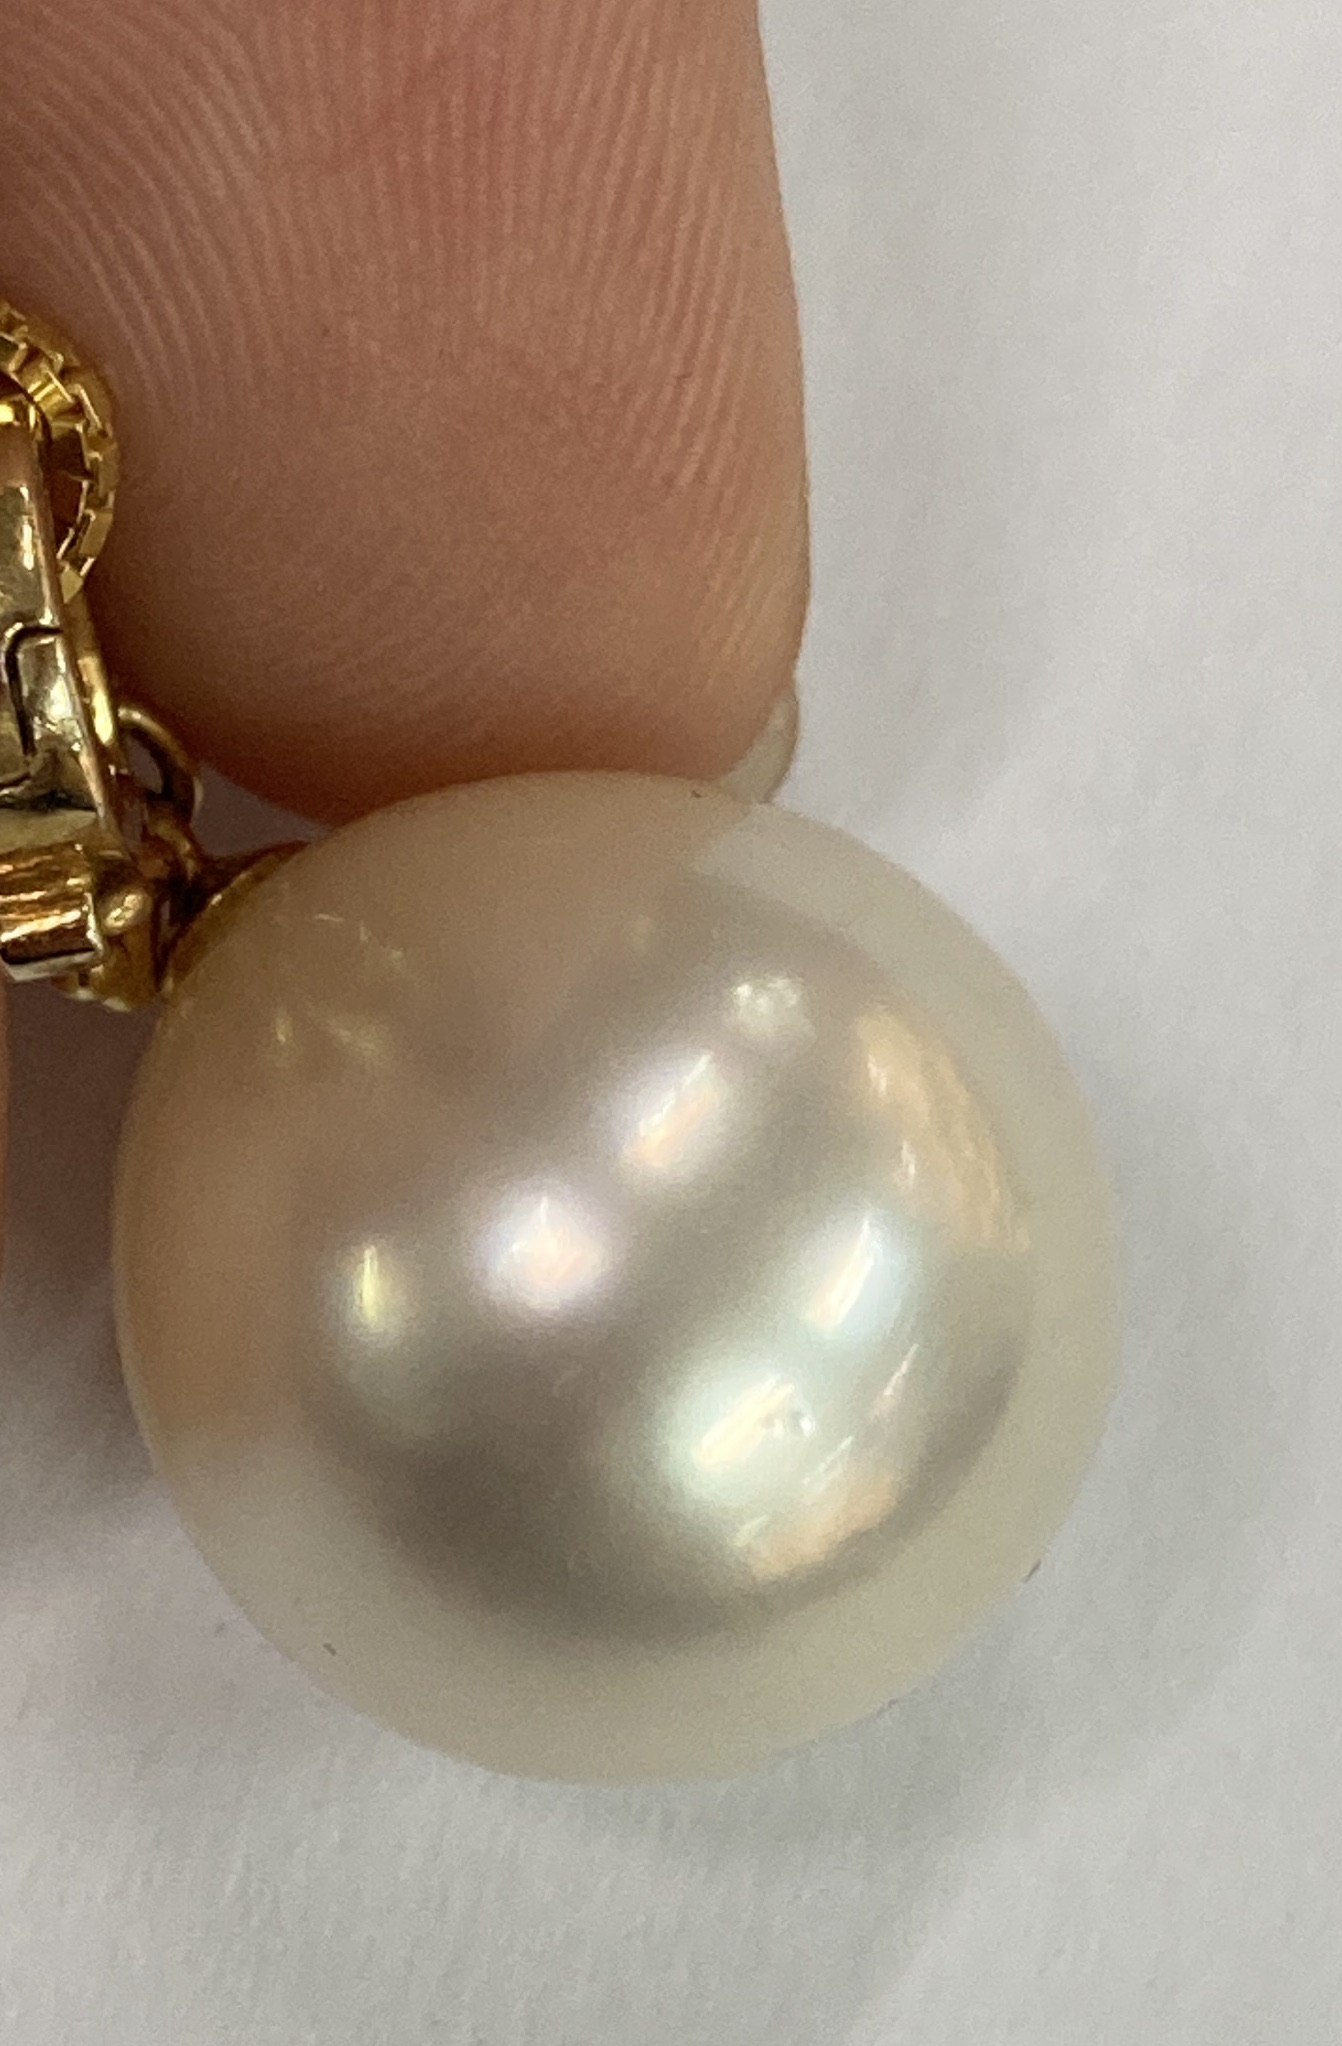 AN OFF-ROUND CULTURED SOUTH SEA PEARL PENDANT ON CHAIN - Image 6 of 9